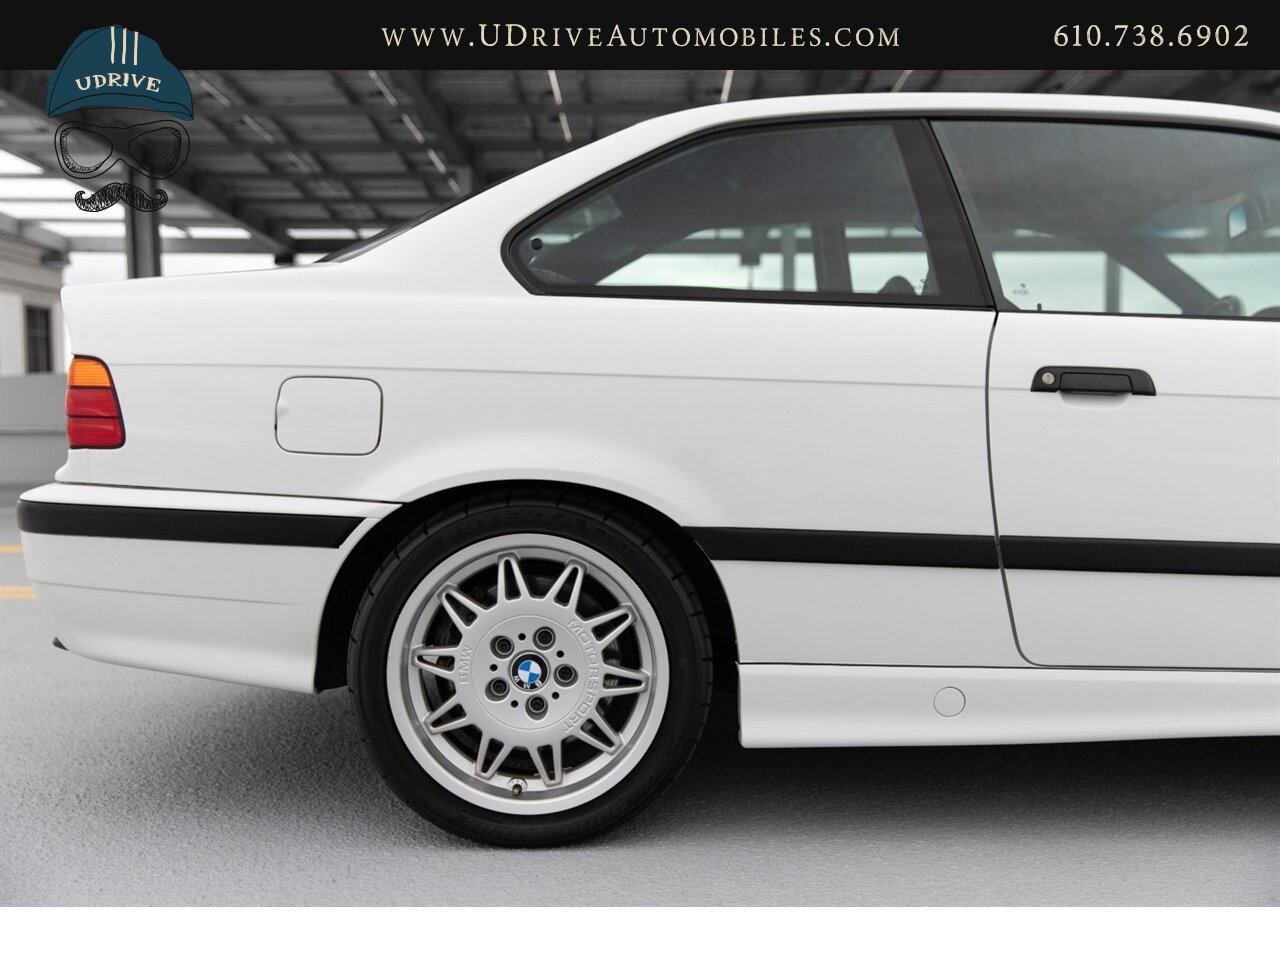 1995 BMW M3 E36 Alpine White over Black Vader Seats  5 Speed - Photo 16 - West Chester, PA 19382